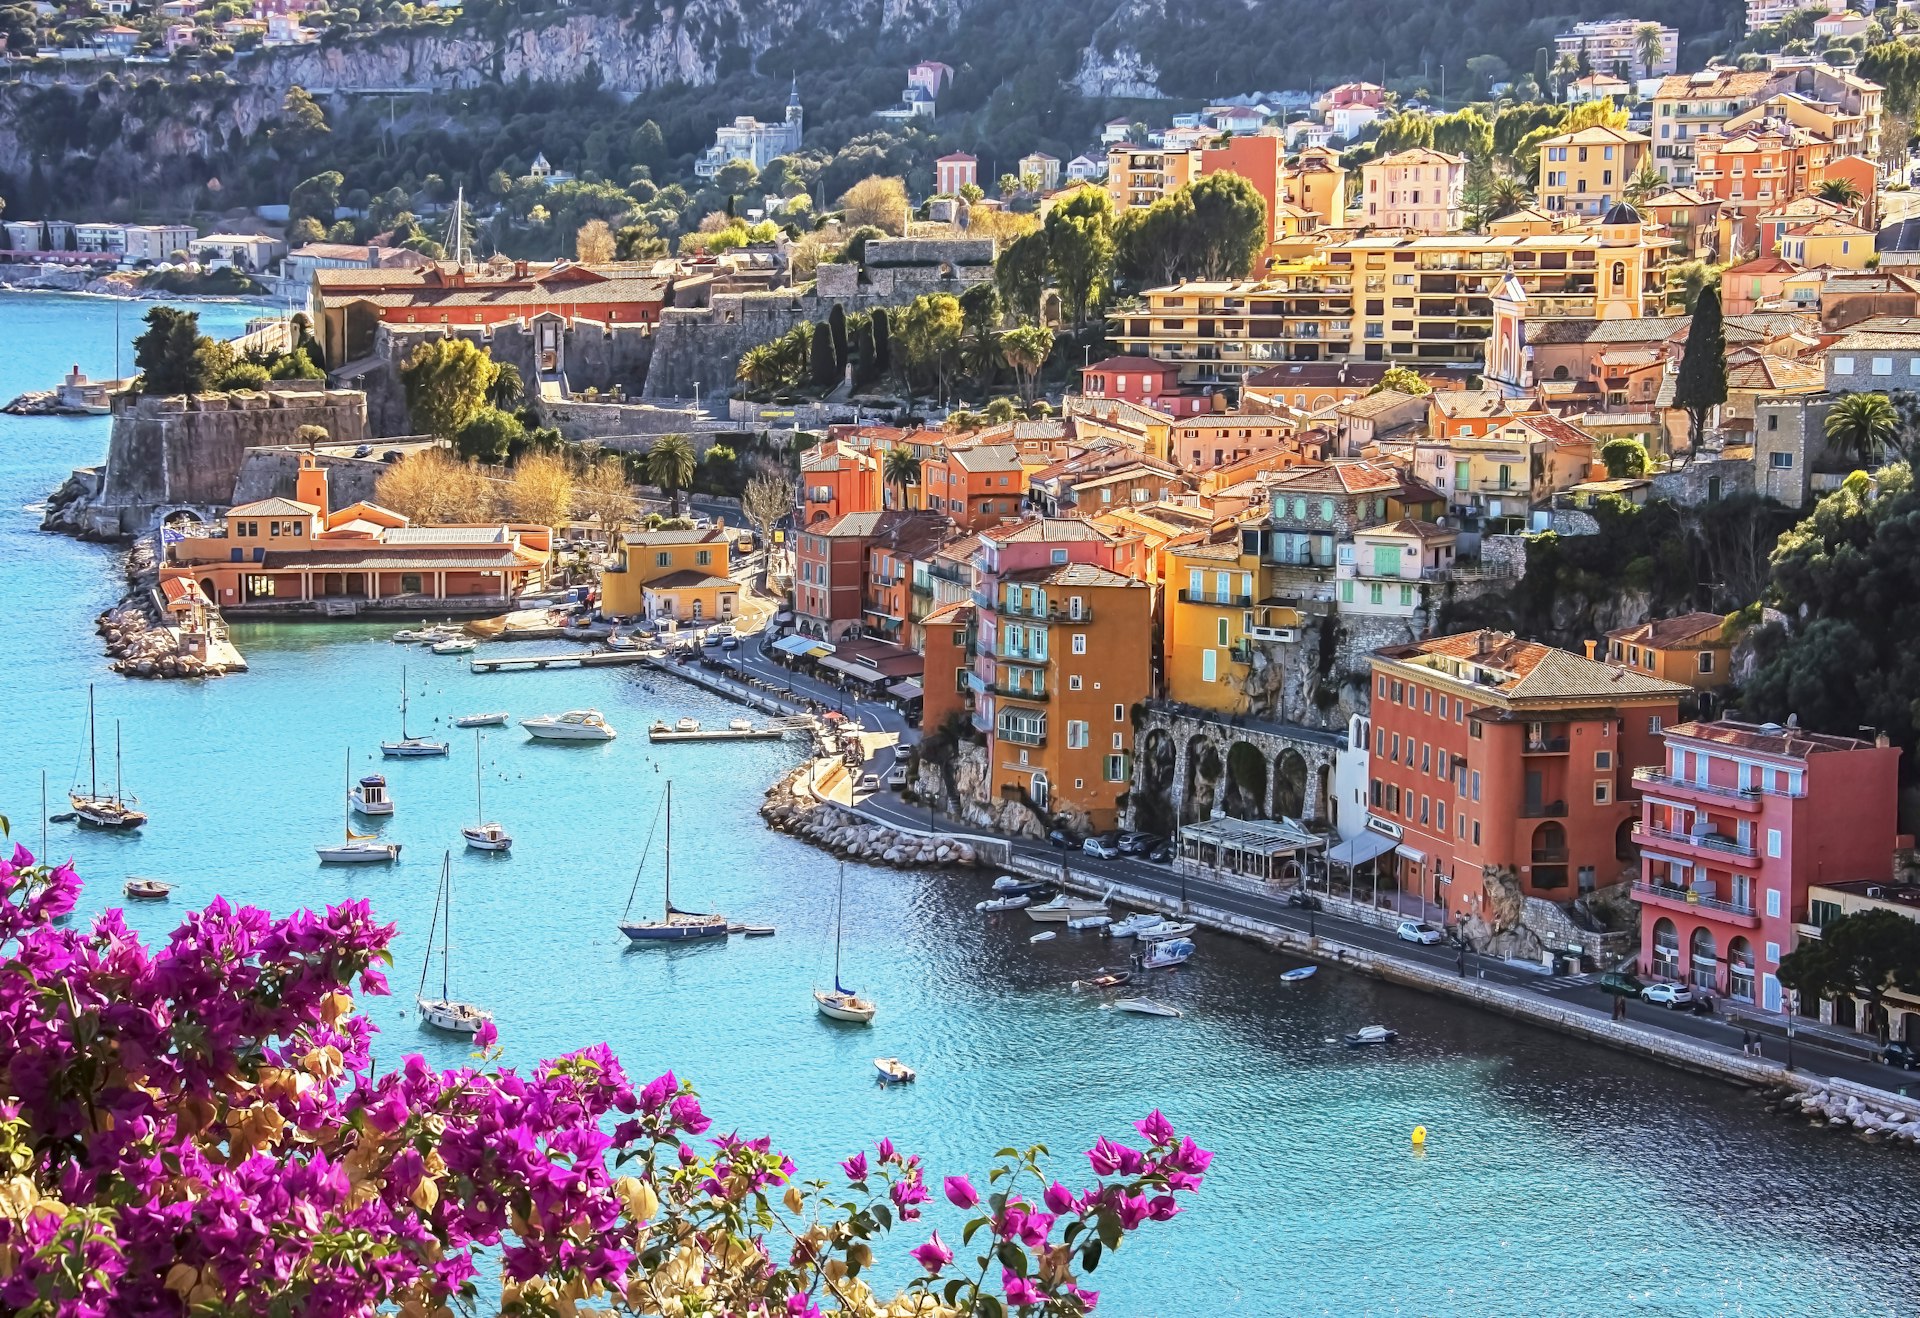 A view of Villefranche-sur-Mer village, with yachts and purple bougainvillea, in Côte d’Azur, France